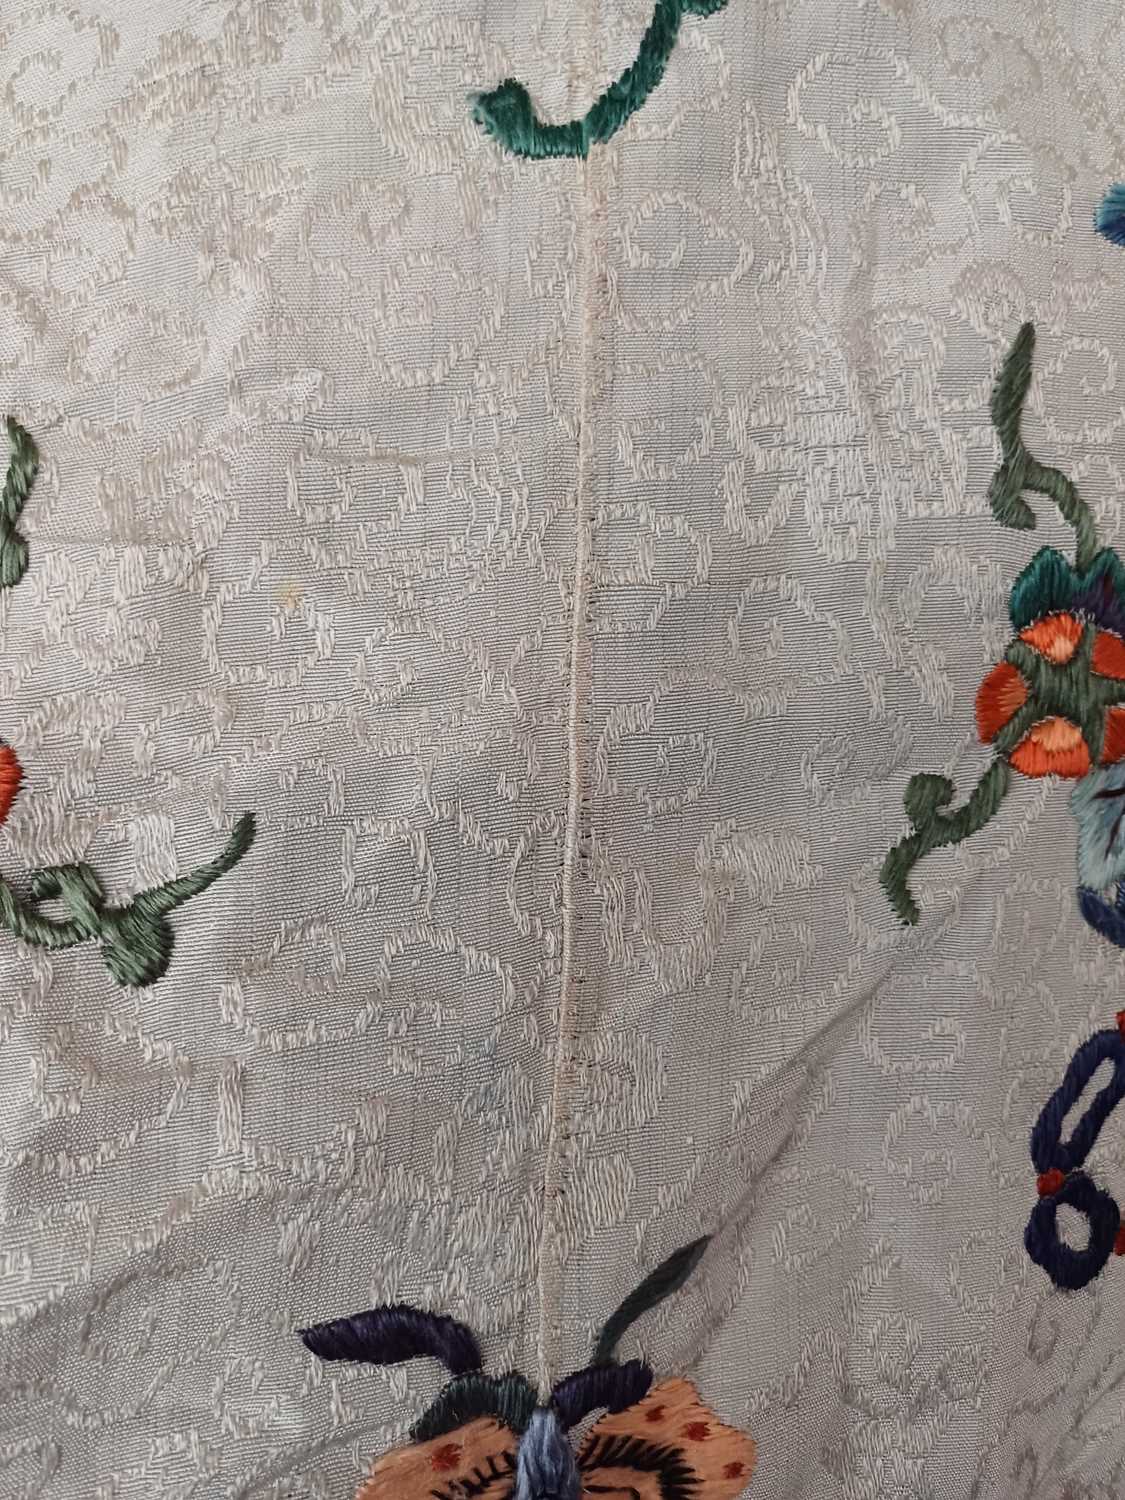 Early 20th Century Chinese Dark Cream Figured Silk Robe embroidered with decorative birds and floral - Image 28 of 31